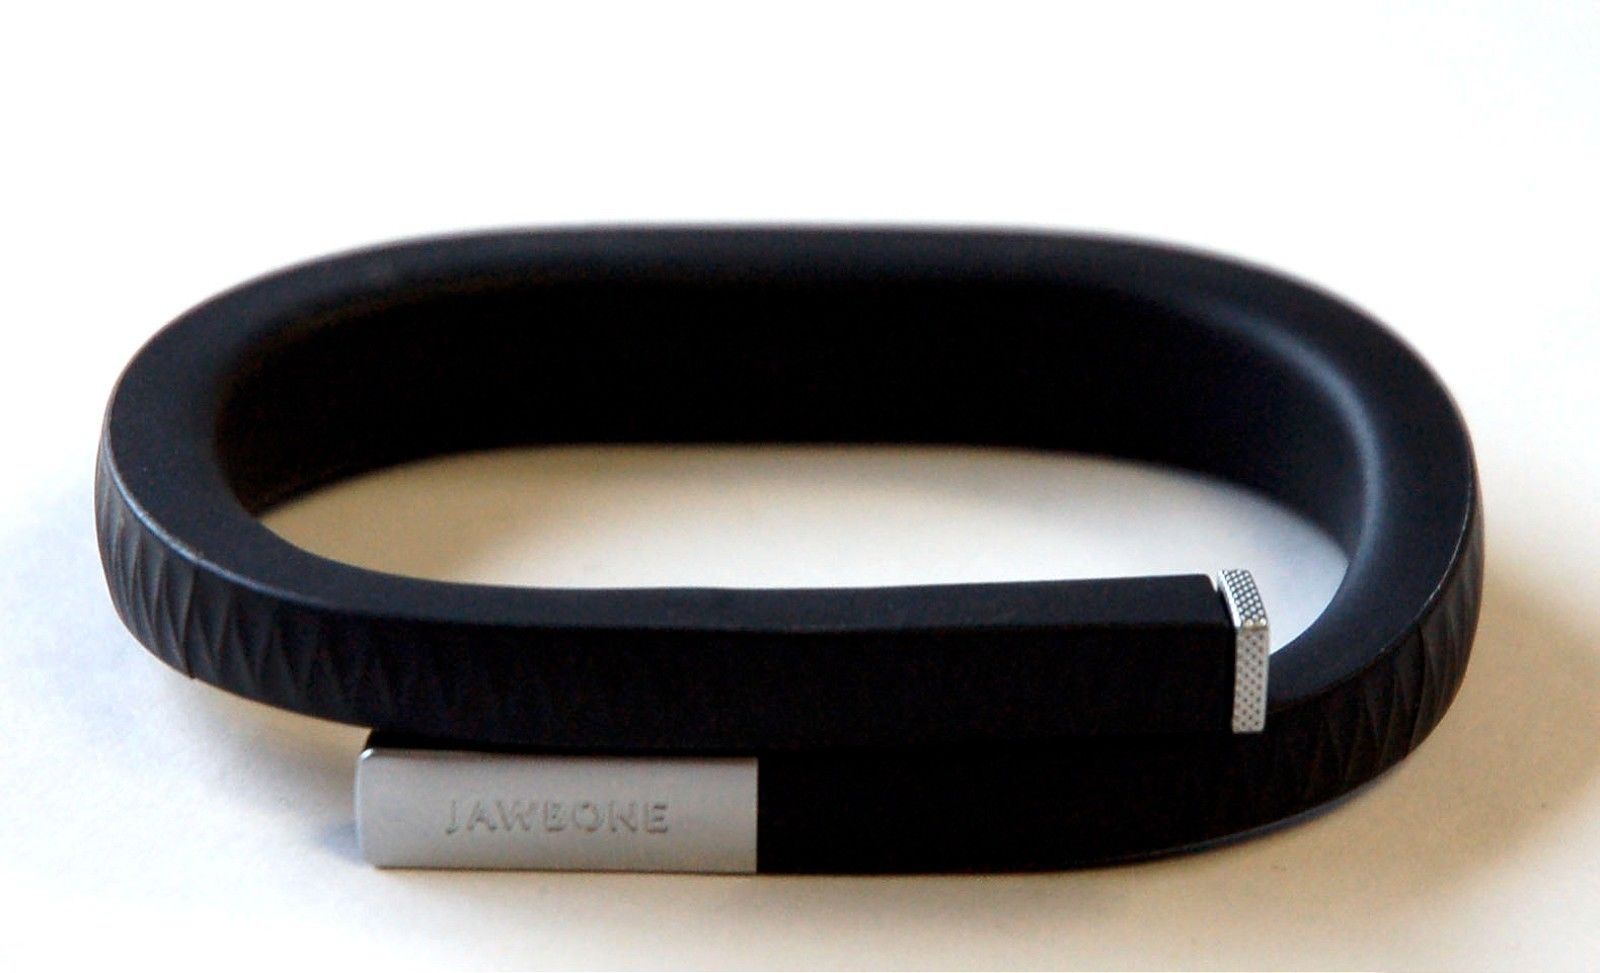 UP by JAWBONE available in Small & Medium 